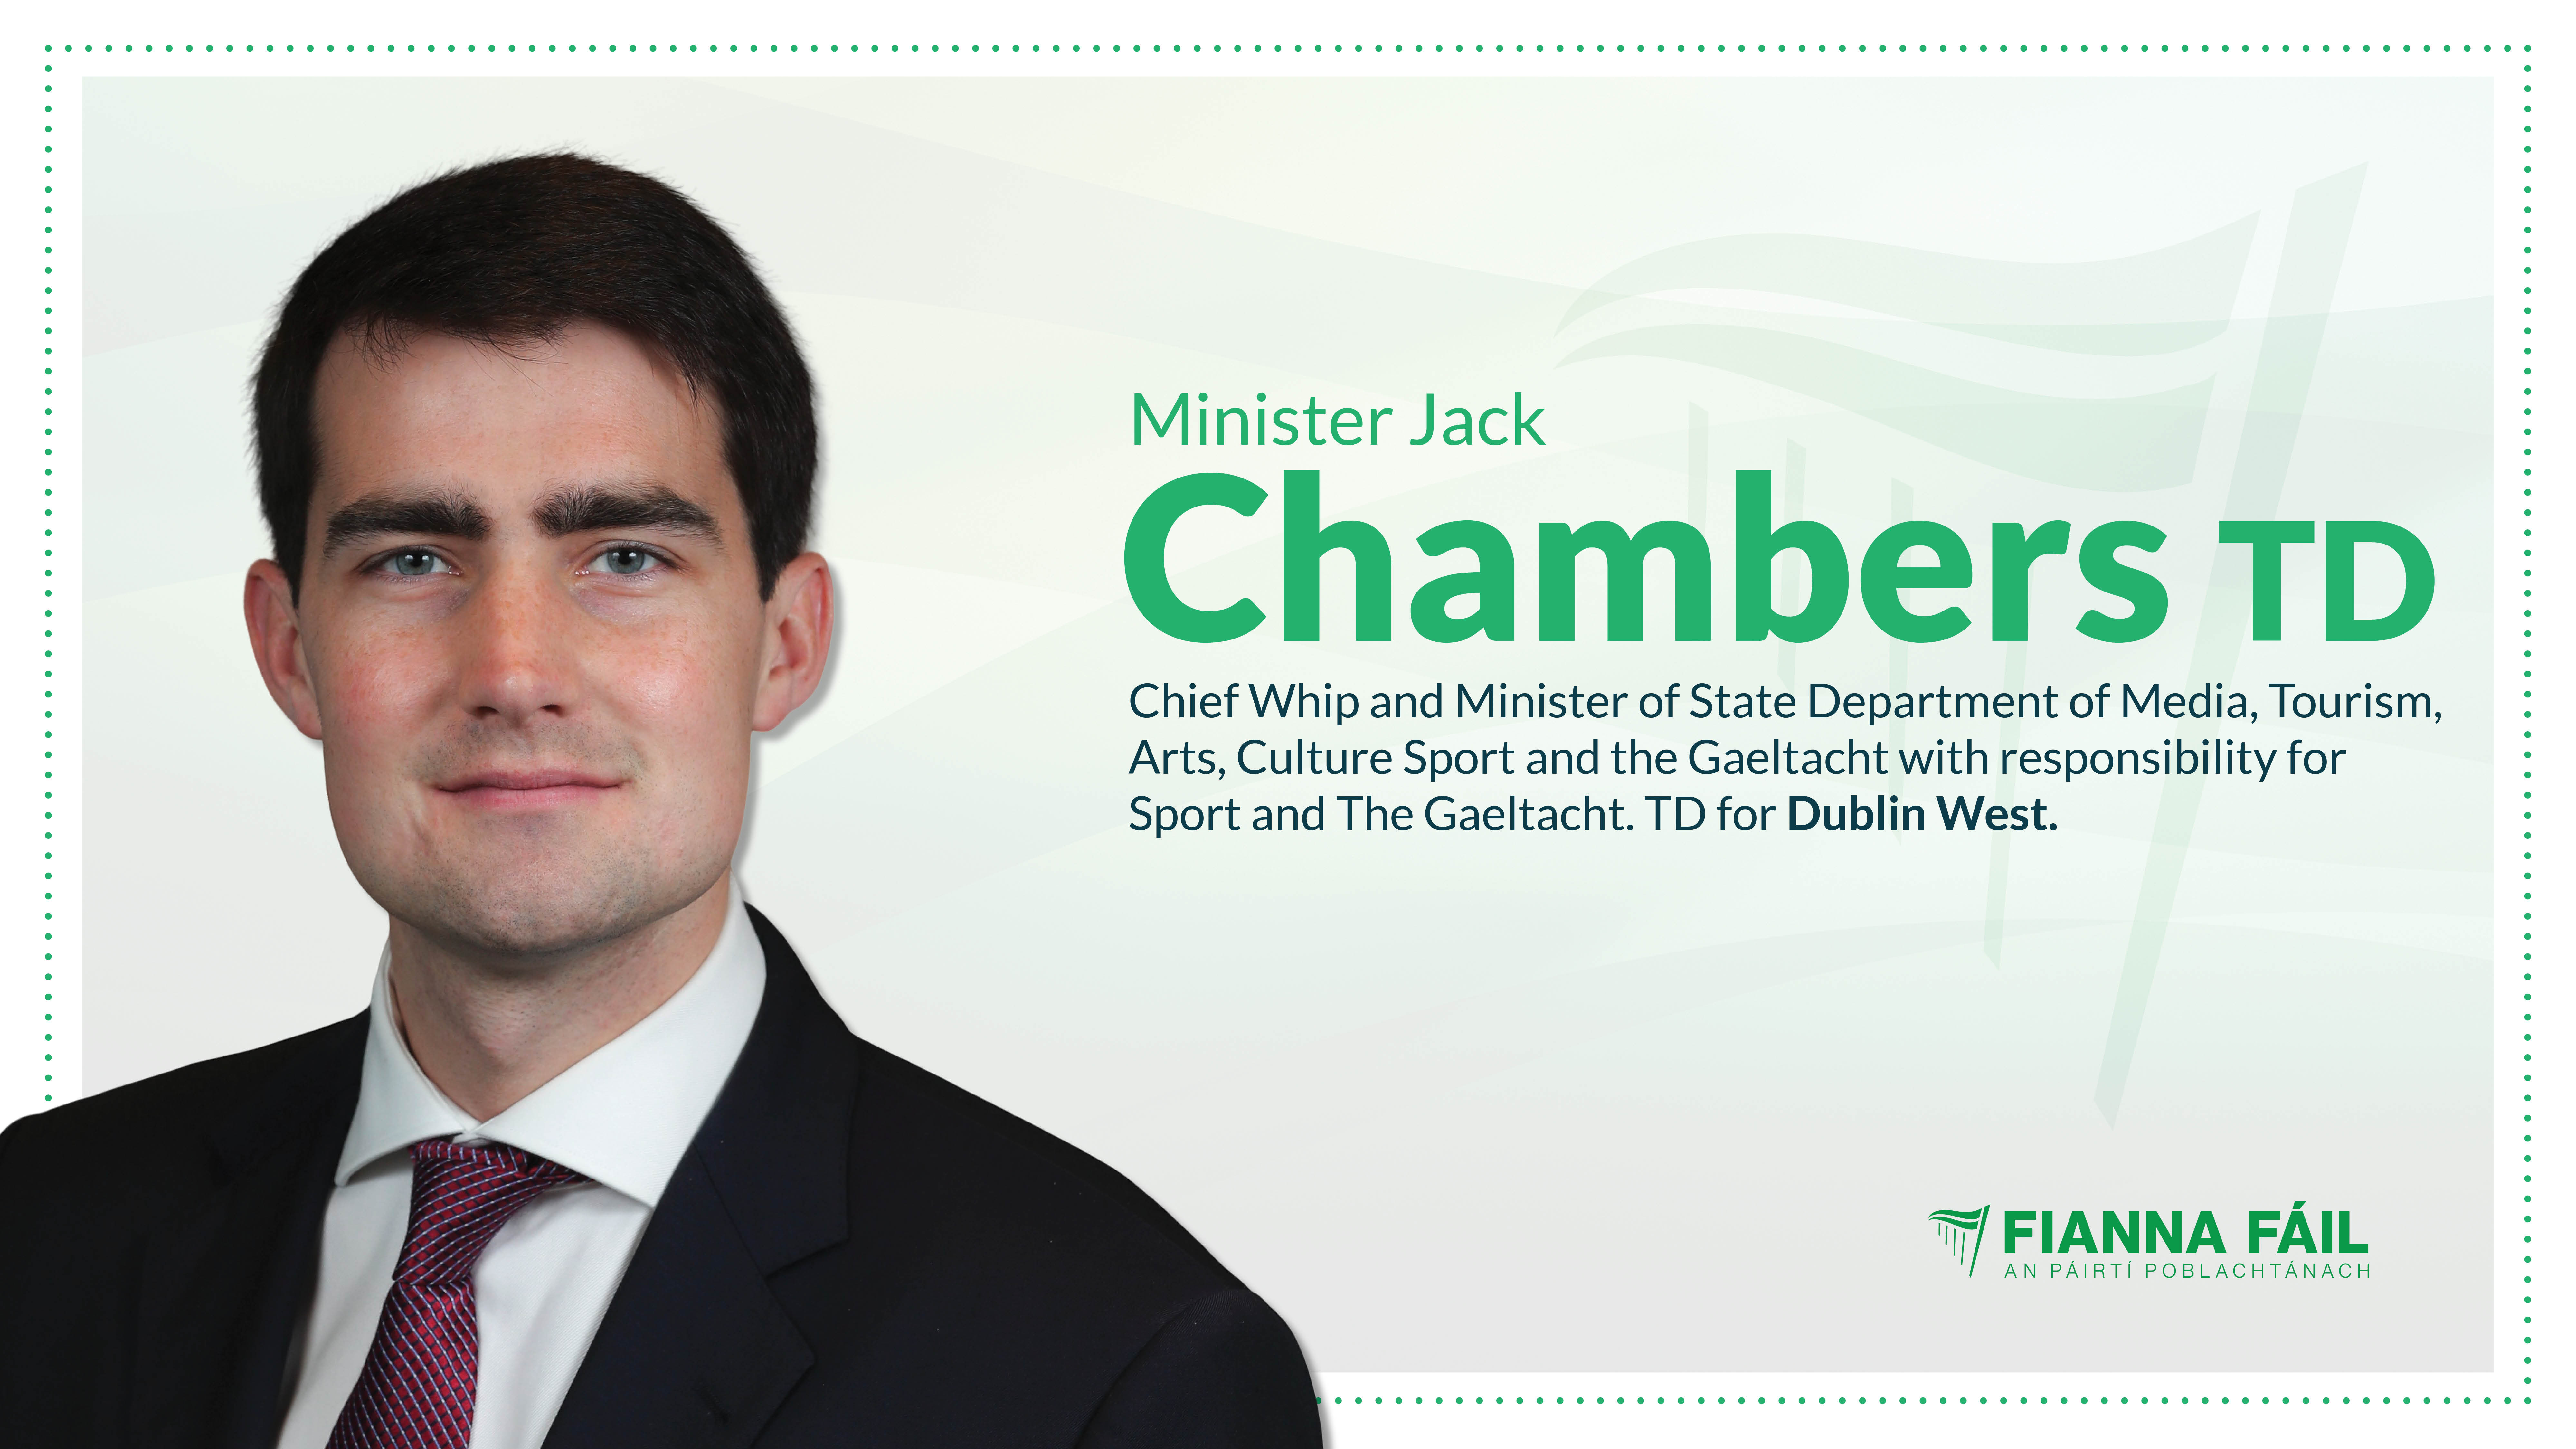 Spring Legislation Programme published by Government Chief Whip Jack Chambers